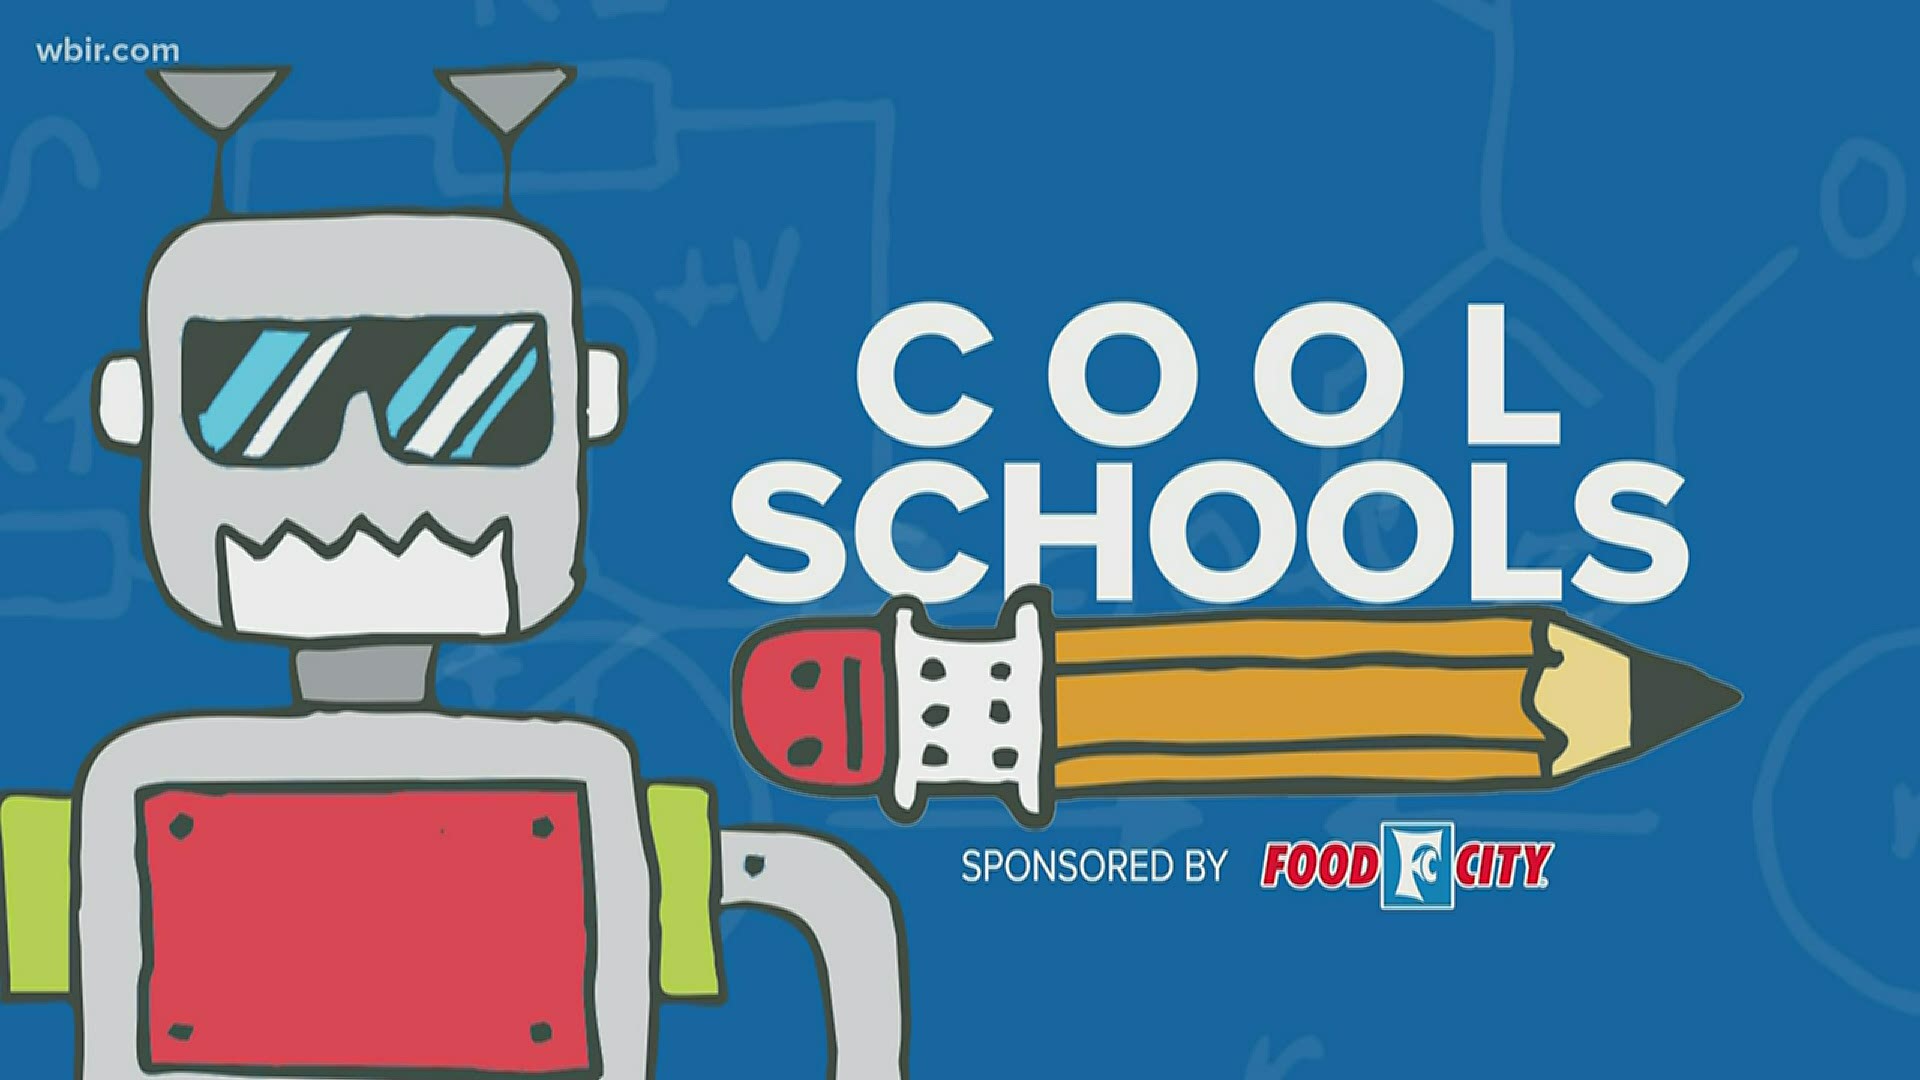 Even though students are not in school, we have a special Cool Schools to share with you.